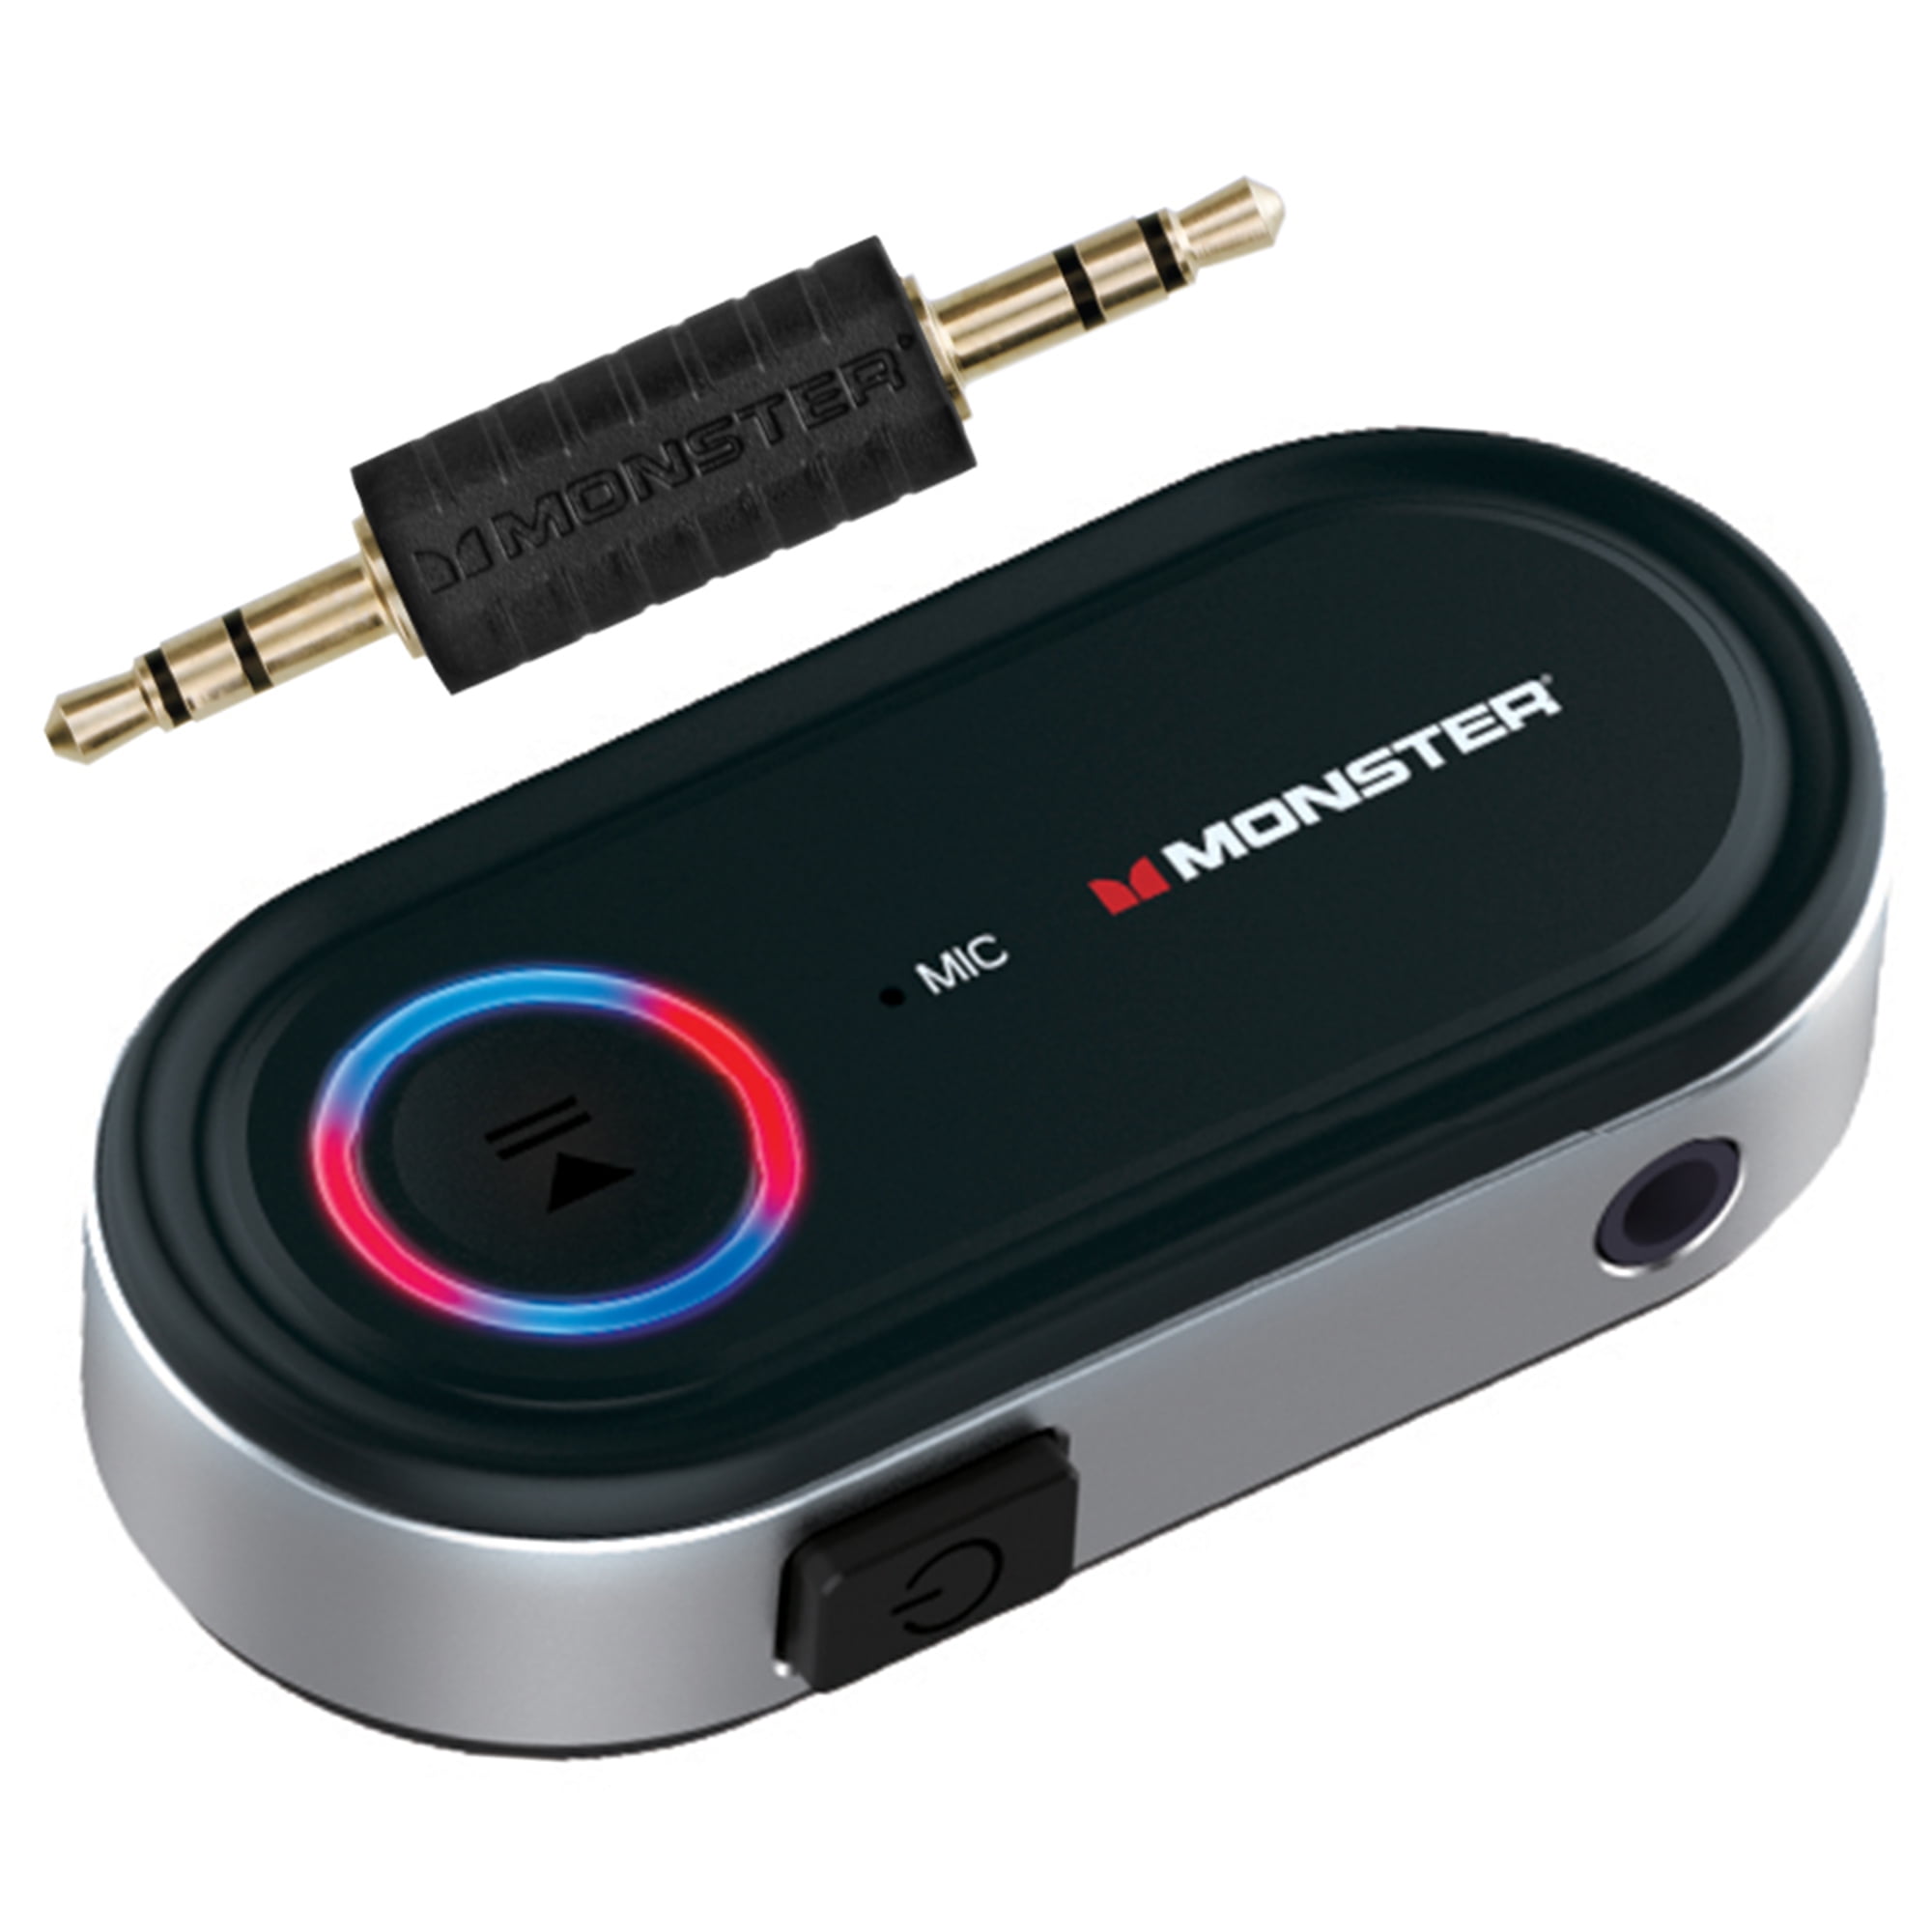 Monster LED Bluetooth Audio Receiver, Speak Through Your Vehicle's  Speakers, Voice Activation, Built-in Microphone 